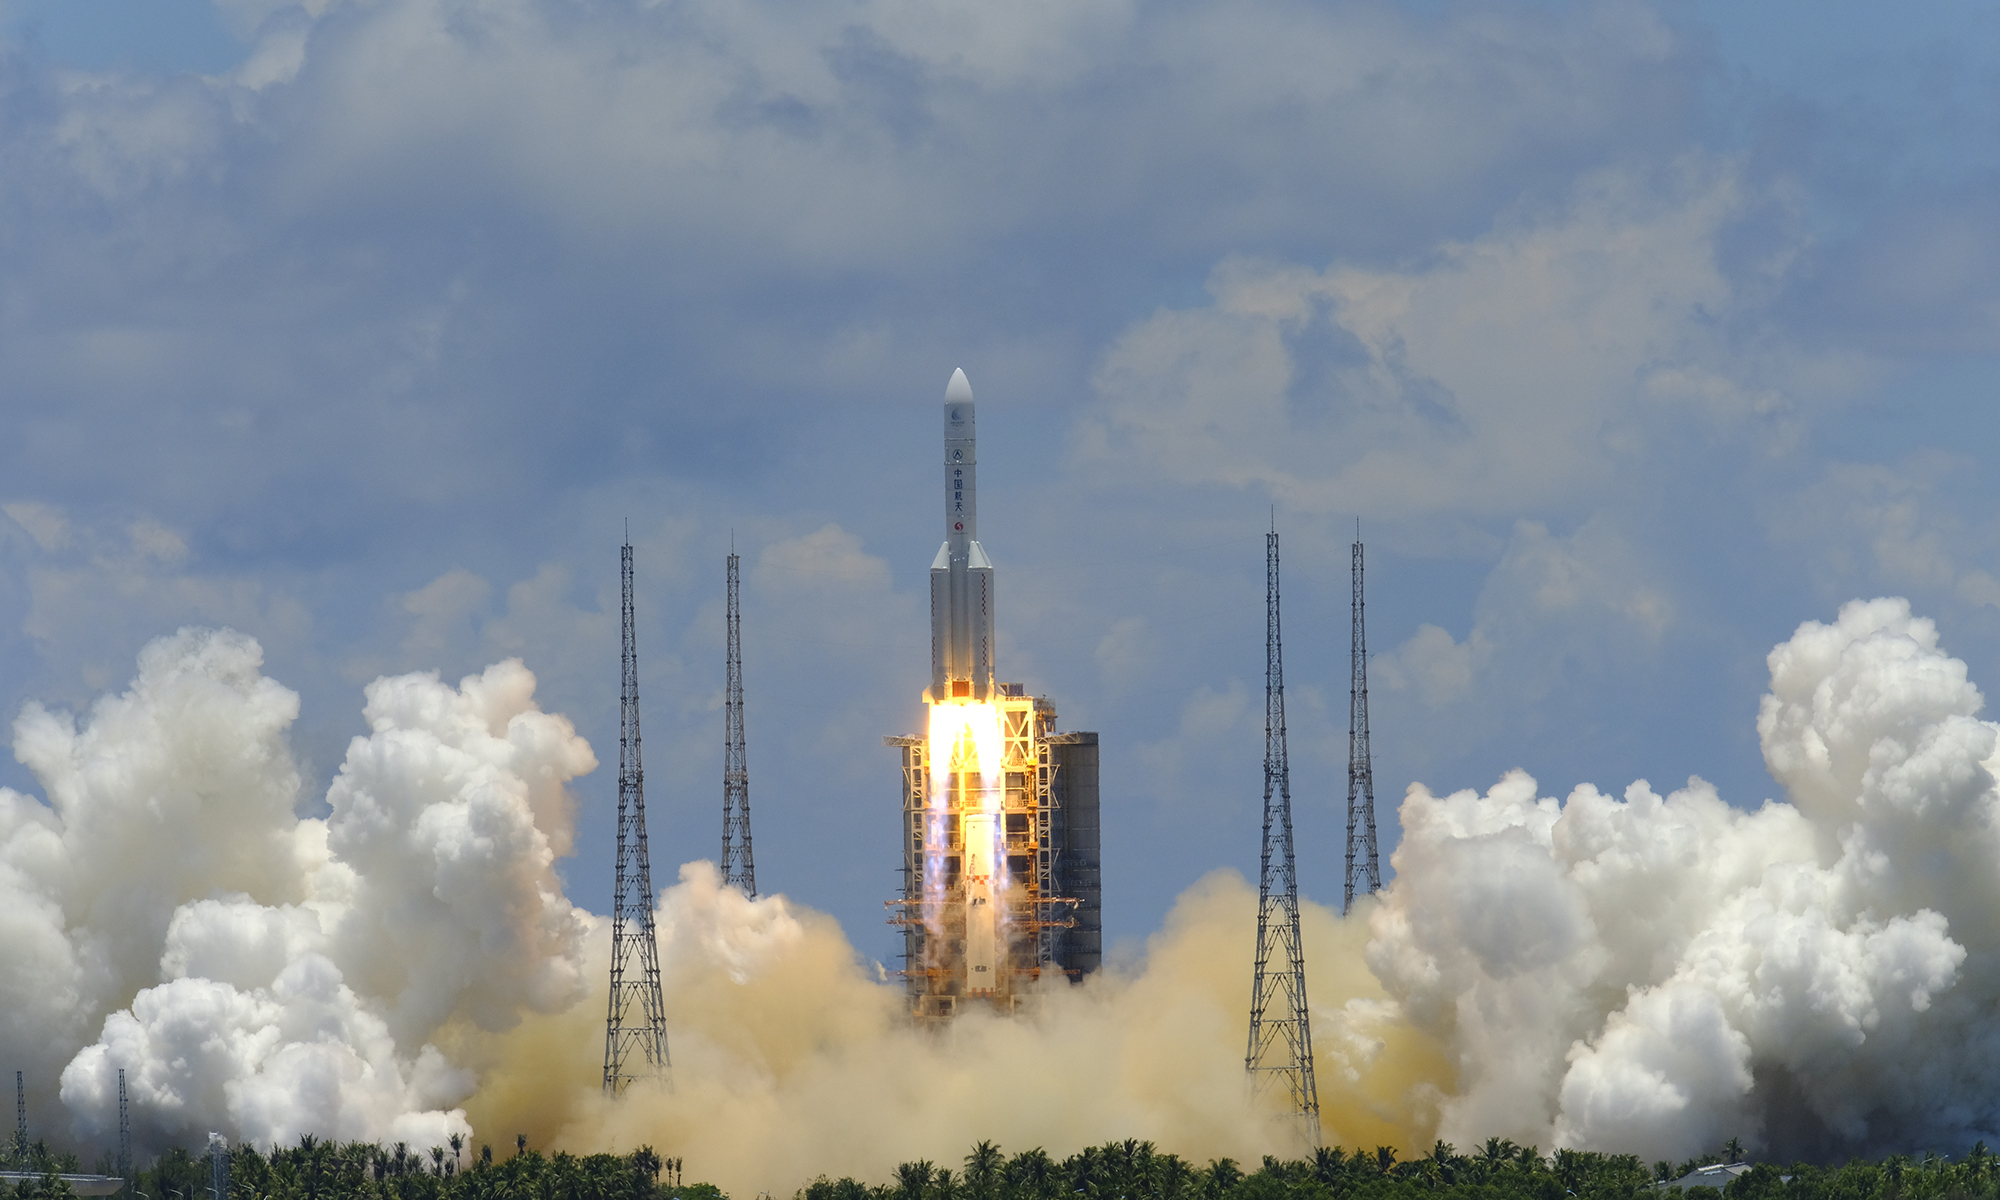 China successfully launched its first Mars probe, named Tianwen-1, via a Long March-5 Y4 carrier rocket from Wenchang Space Launch Center in South China's Hainan Province into planned orbit on July 23. Photo: Guo Wenbin/Our Space